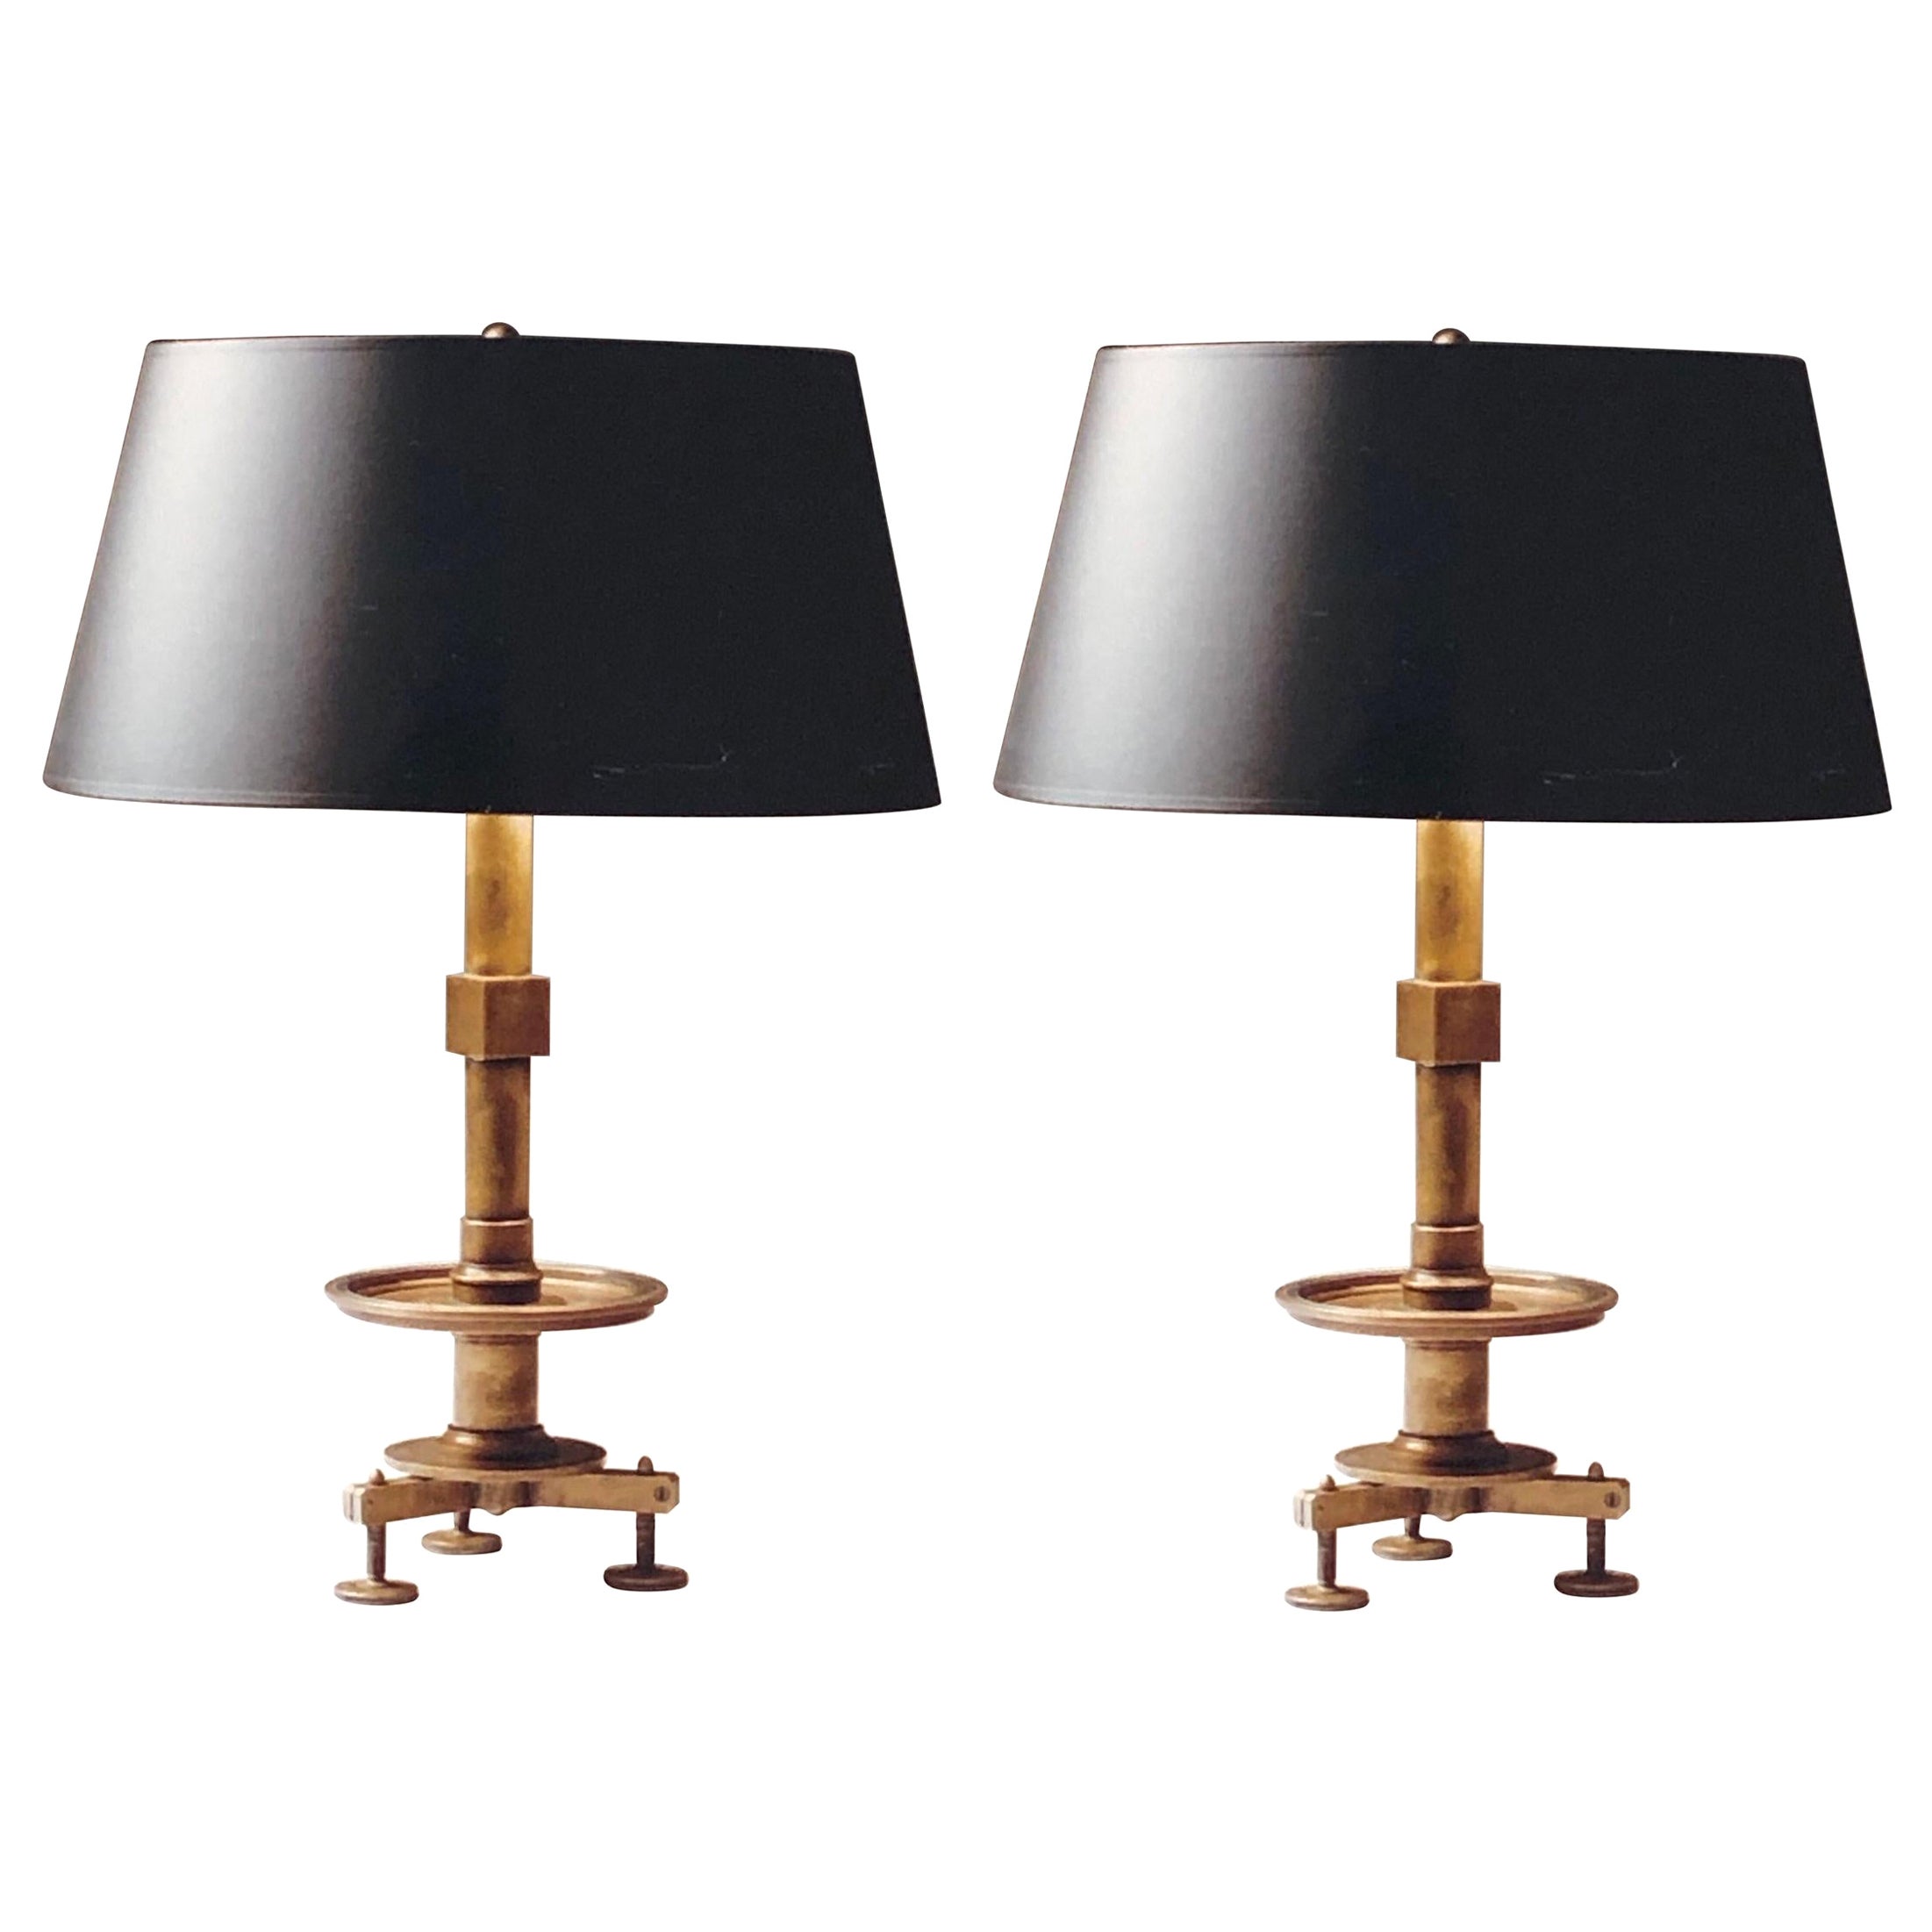 Pair of French Modern Neoclassical Brass and Steel Industrial Style Table Lamps For Sale